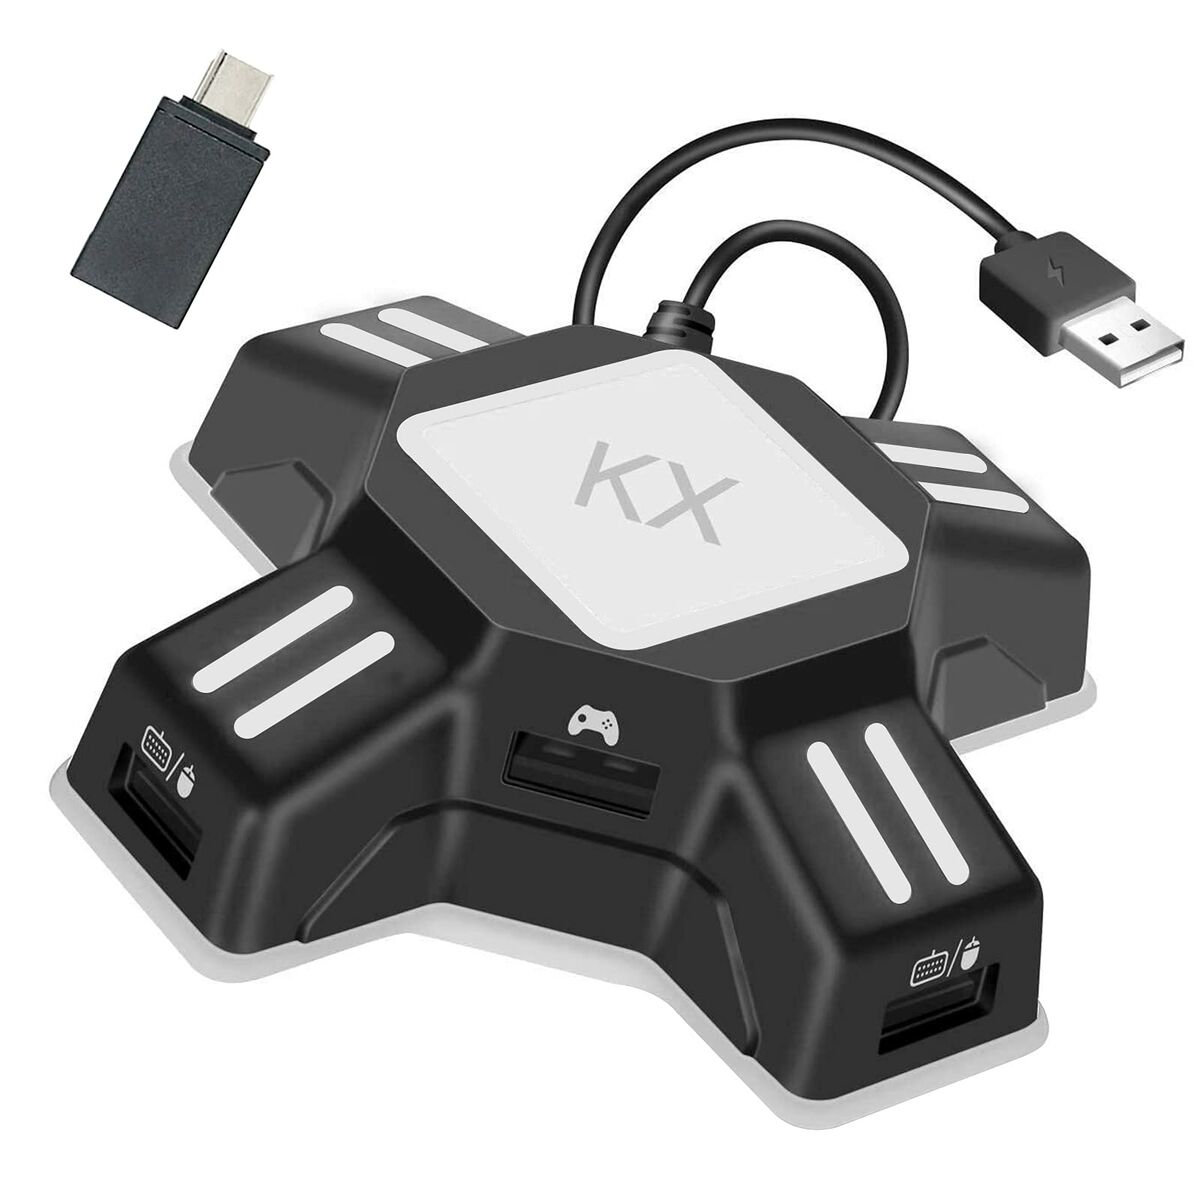 Adapter ps3 Keyboard and Mouse. Keyboard and Mouse Converter. DC-X Import game Adapter. Адаптер для игр